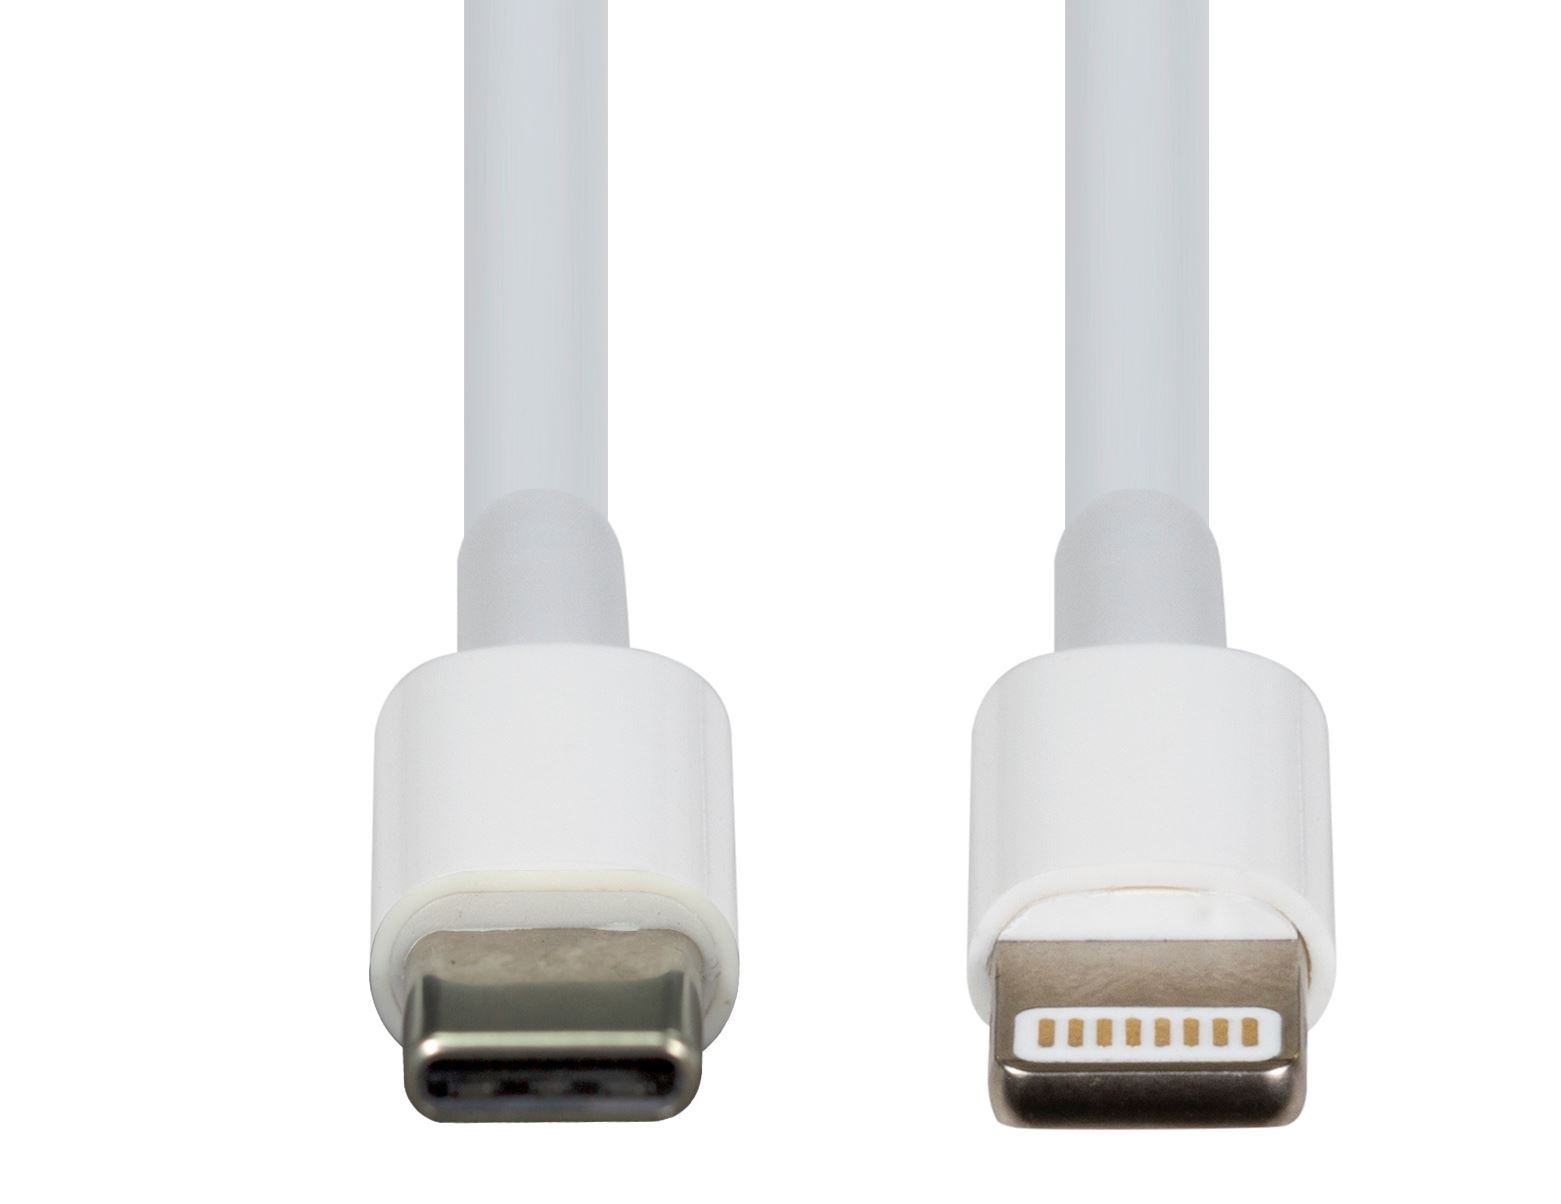 DYNAMIX_2m_USB-C_to_Lightning_Charge_&_Sync_Cable._For_Apple_iPhone,_iPad,_iPad_mini_&_iPods_*Not_MFI_Certified* 938